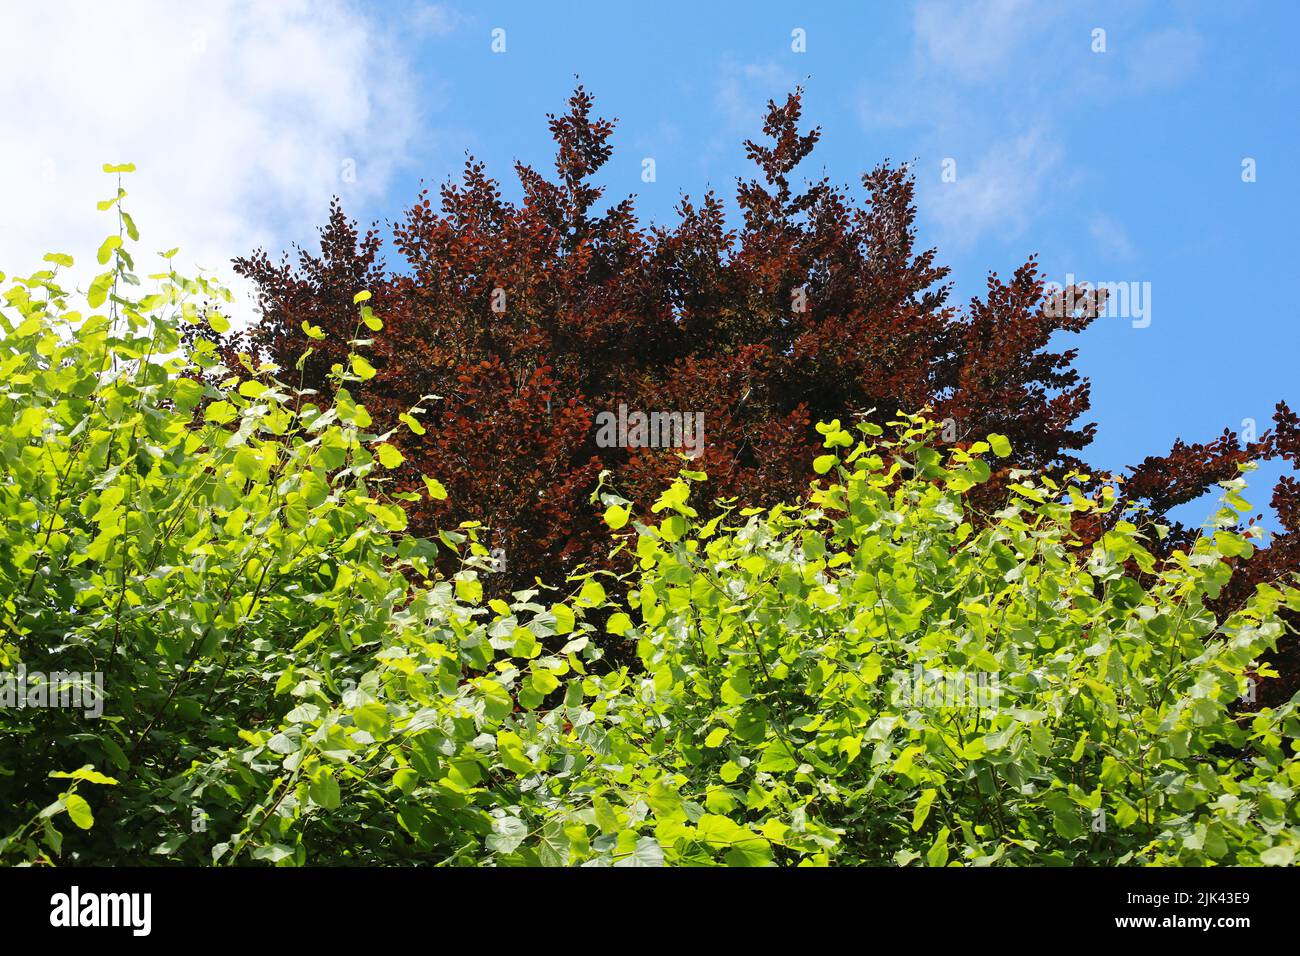 A backdrop of green and red trees against a blue sky. Stock Photo